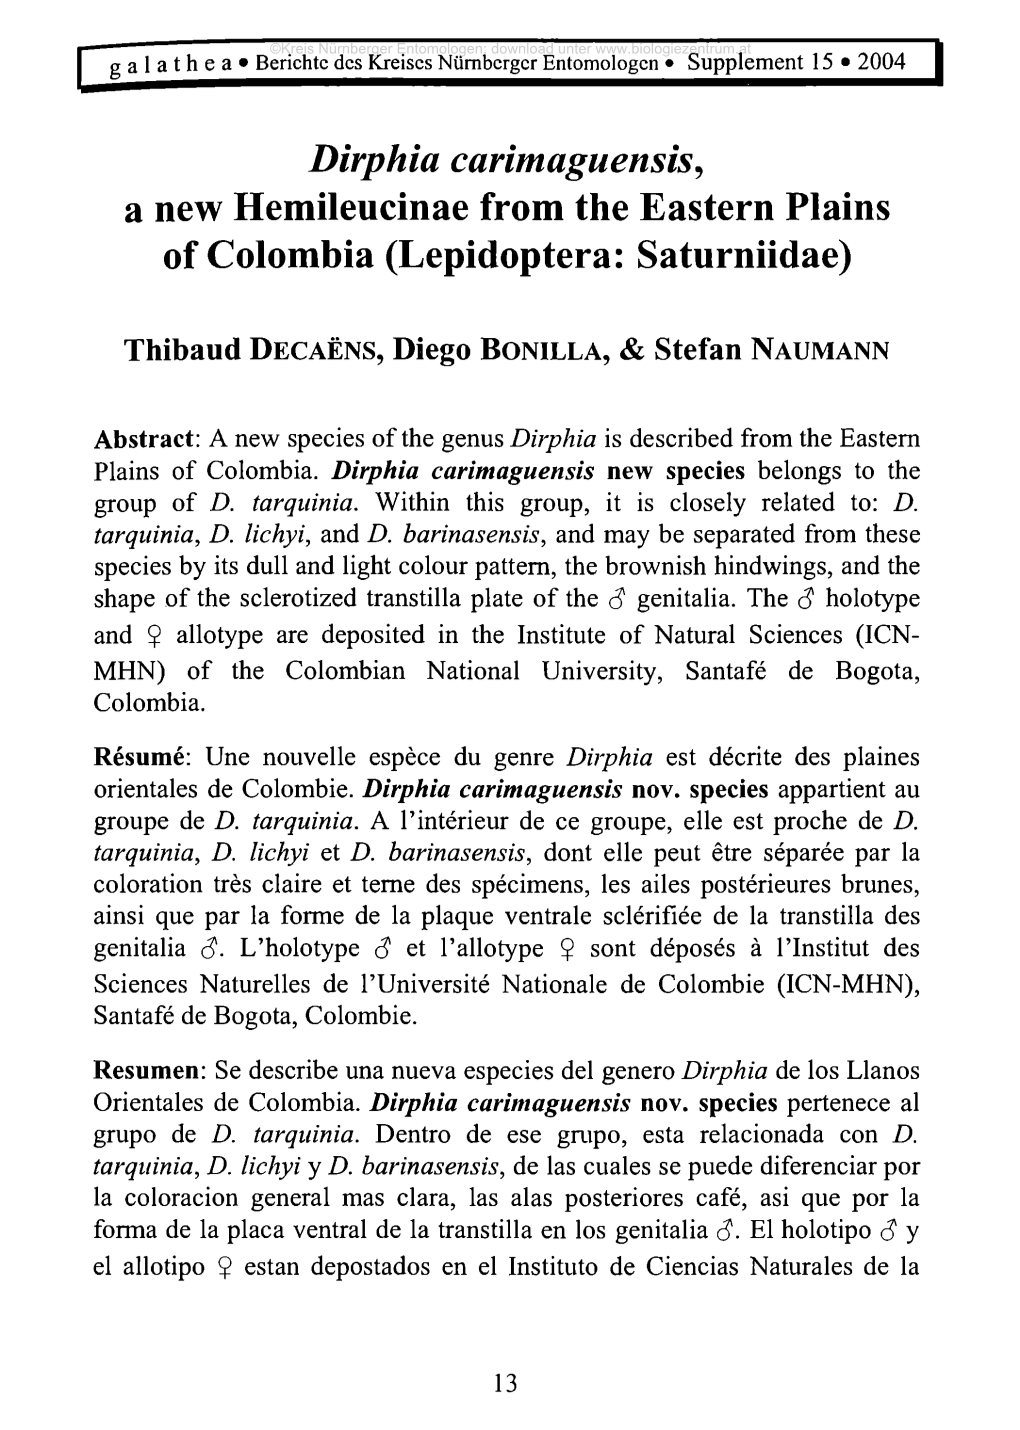 Dirphia Carimaguensis, a New Hemileucinae from the Eastern Plains of Colombia (Lepidoptera: Saturniidae)